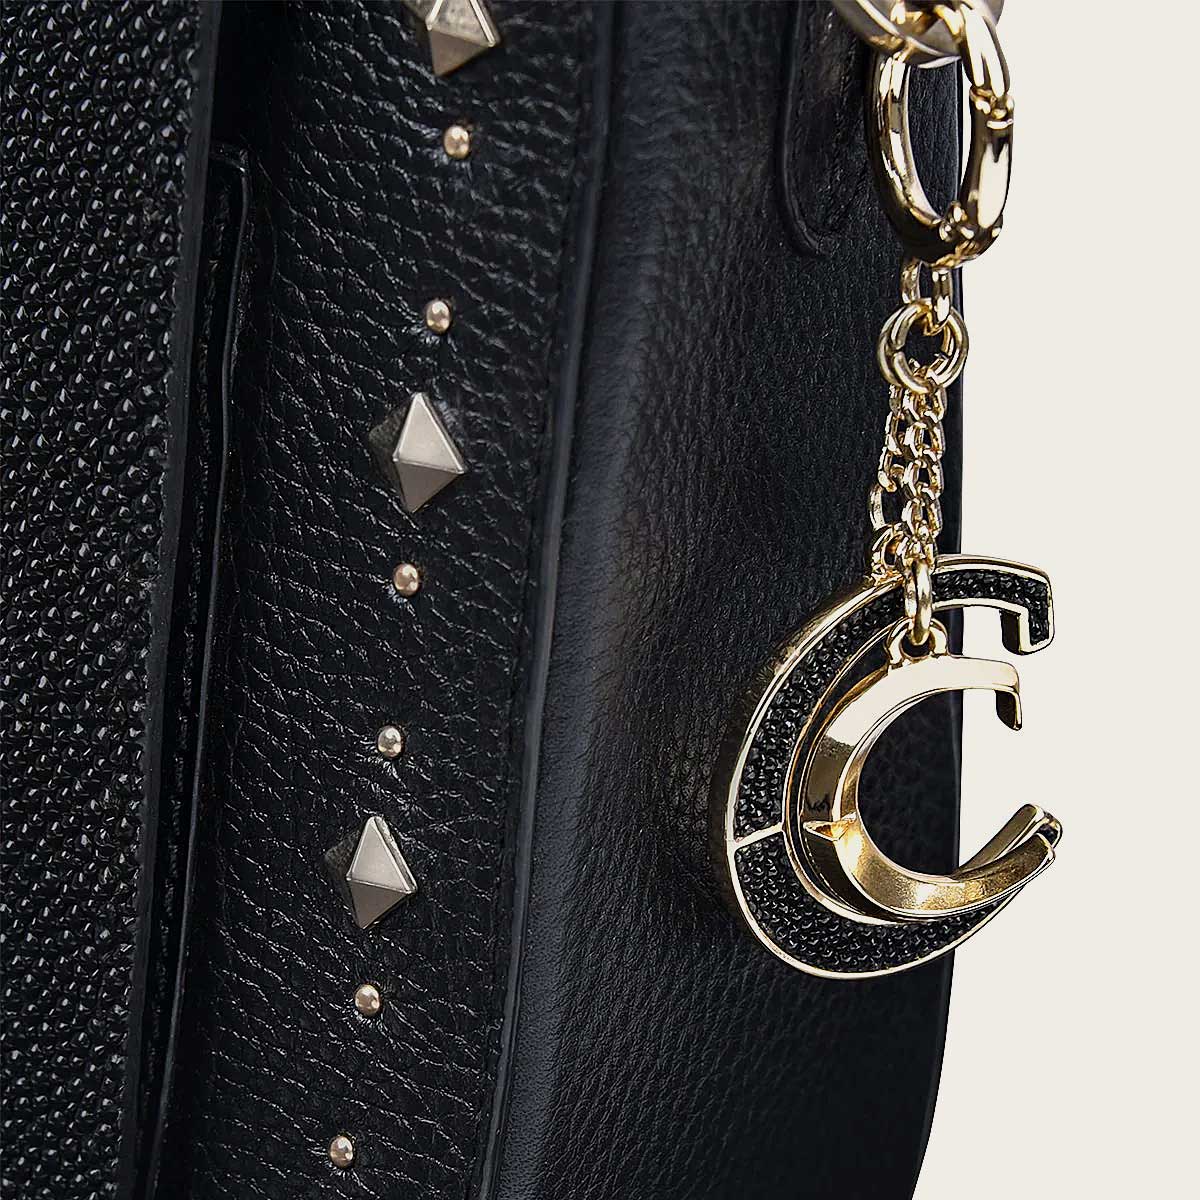 The exclusive Cuadra monogram keychain on the side is a unique and stylish addition,